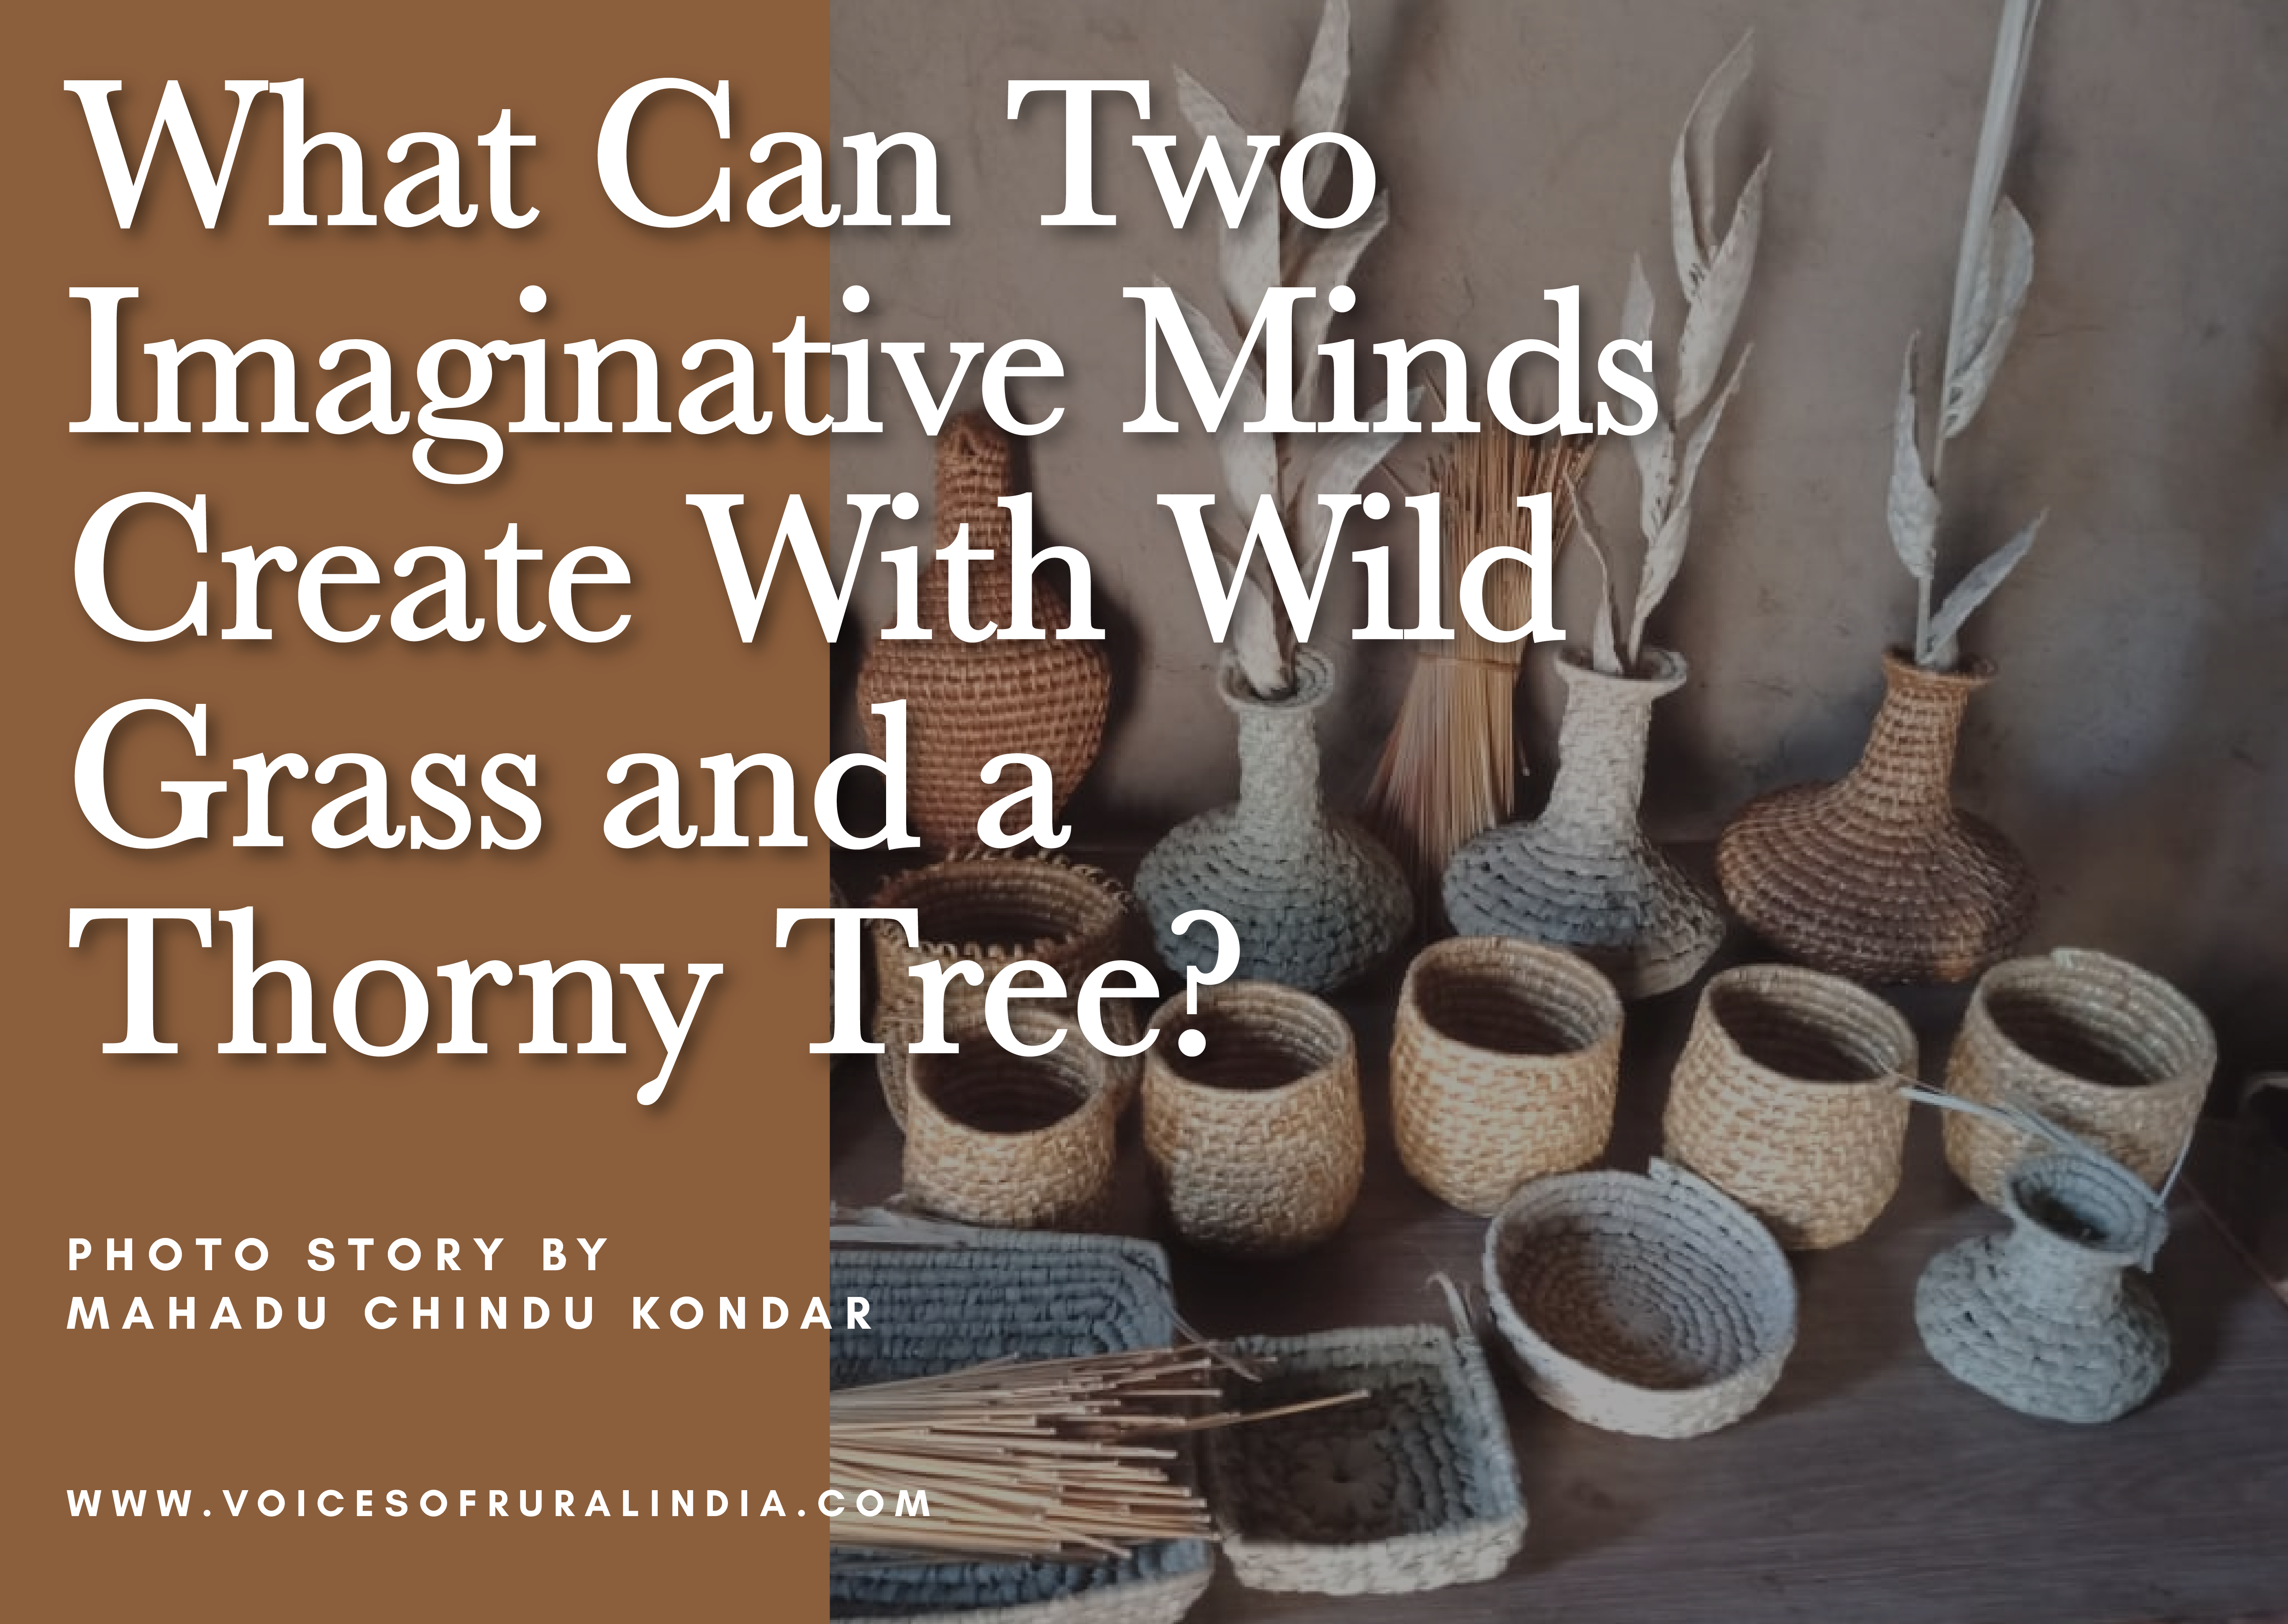 What Can Two Imaginative Minds Create With Wild Grass and a Thorny Tree?